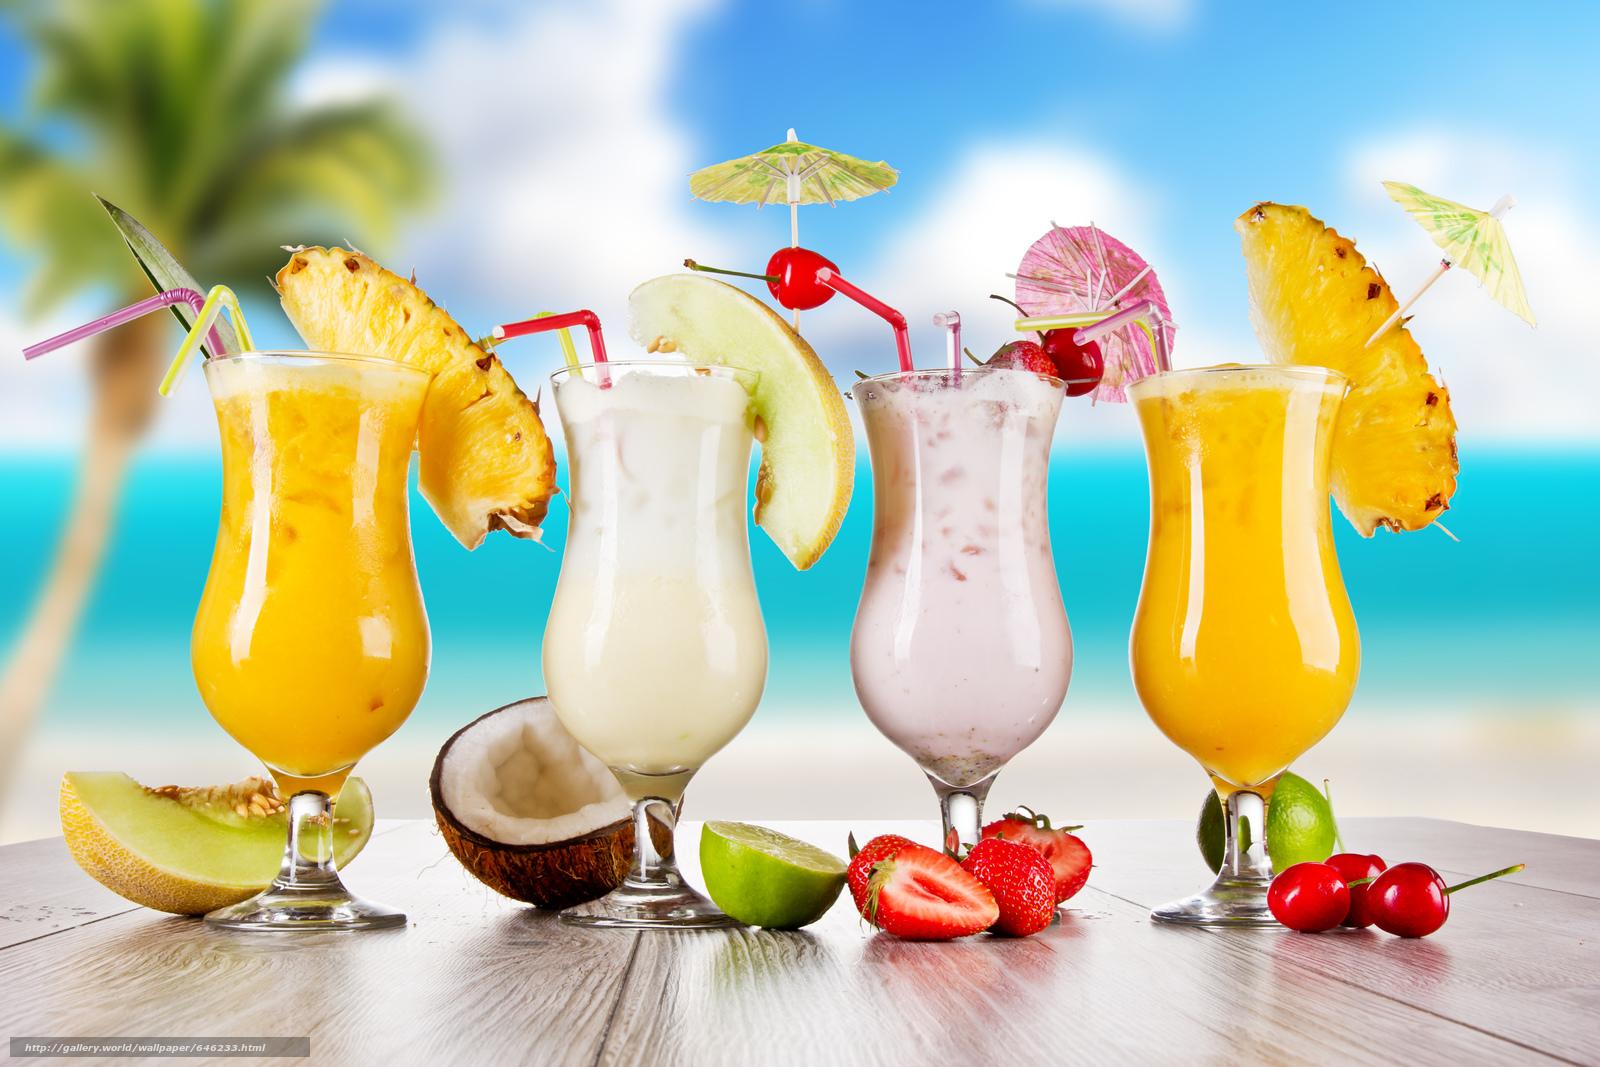 Tropical Drink Wallpapers Top Free Tropical Drink Backgrounds Wallpaperaccess 9286